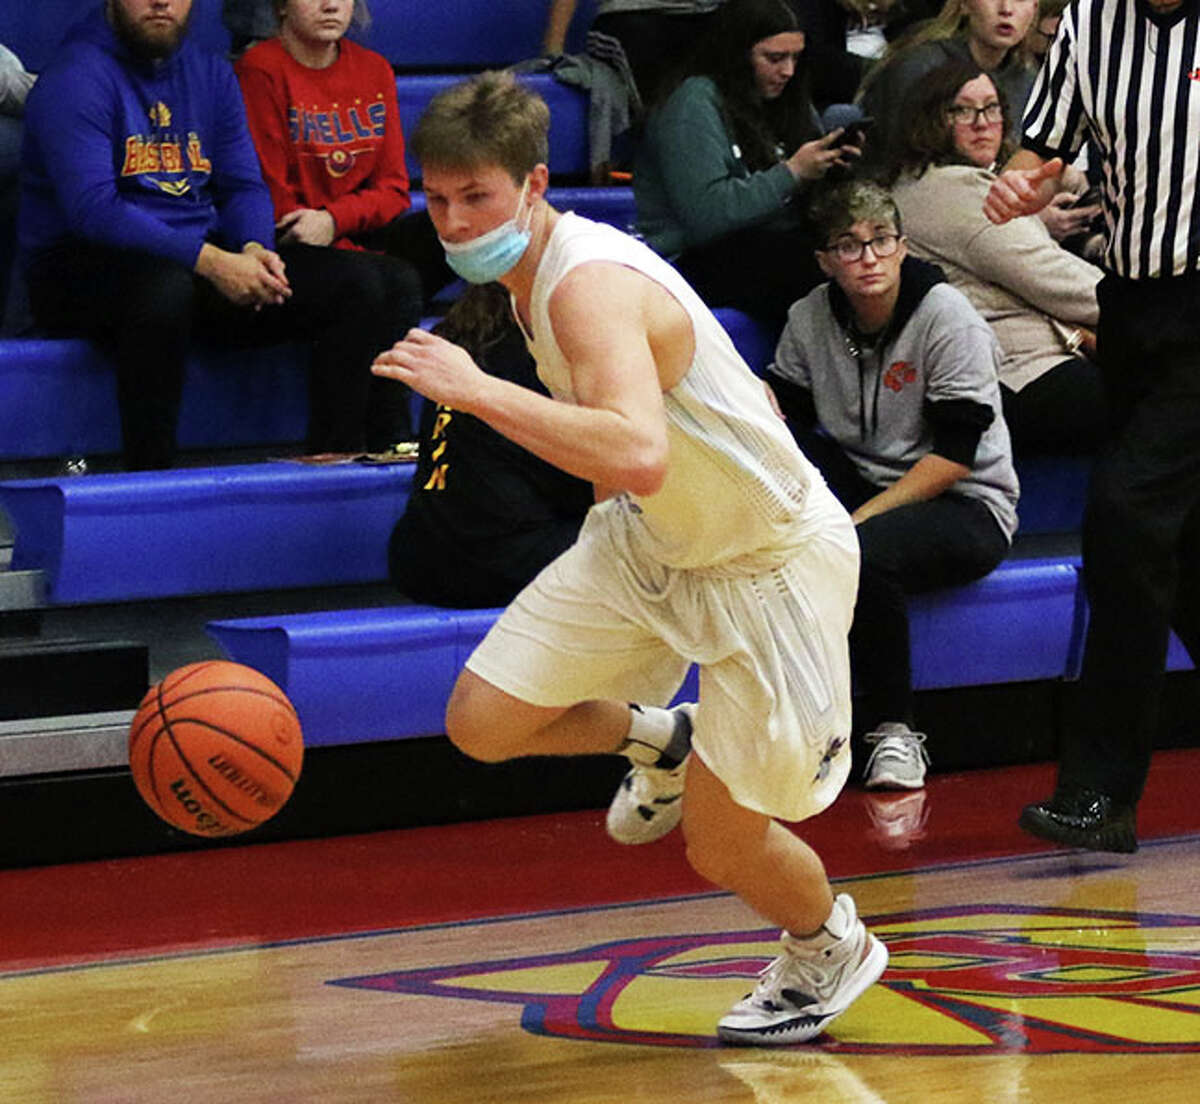 Jersey's Edward Roberts, along with teammate Ayden Kanallakan, each scored 11 points Monday in the Panthers' win over Woodlawn in the Duster Thomas Hoops Classic. Above, Roberts heads upcourt against the host Shells in the Hoopsgiving Classic at Roxana.